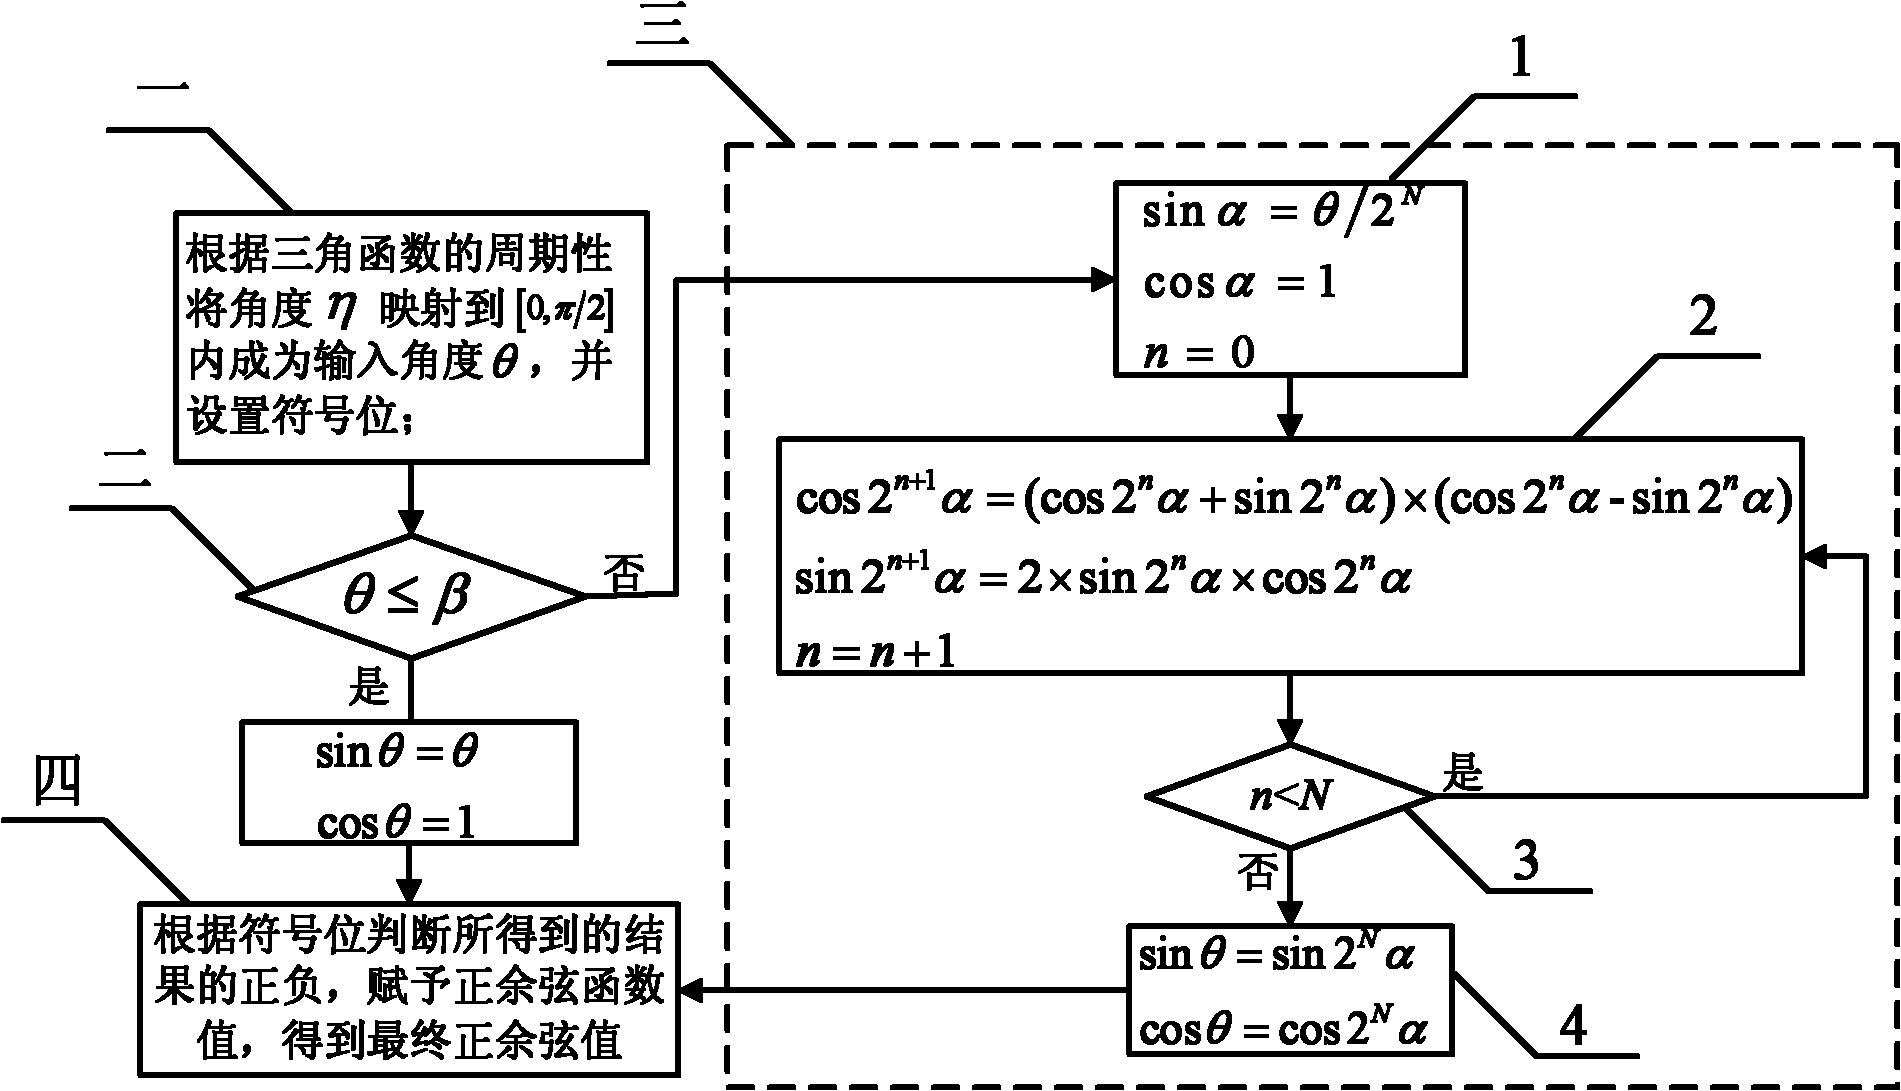 Sine-cosine function IP core capable of reconfiguring spaceborne computer and control method thereof